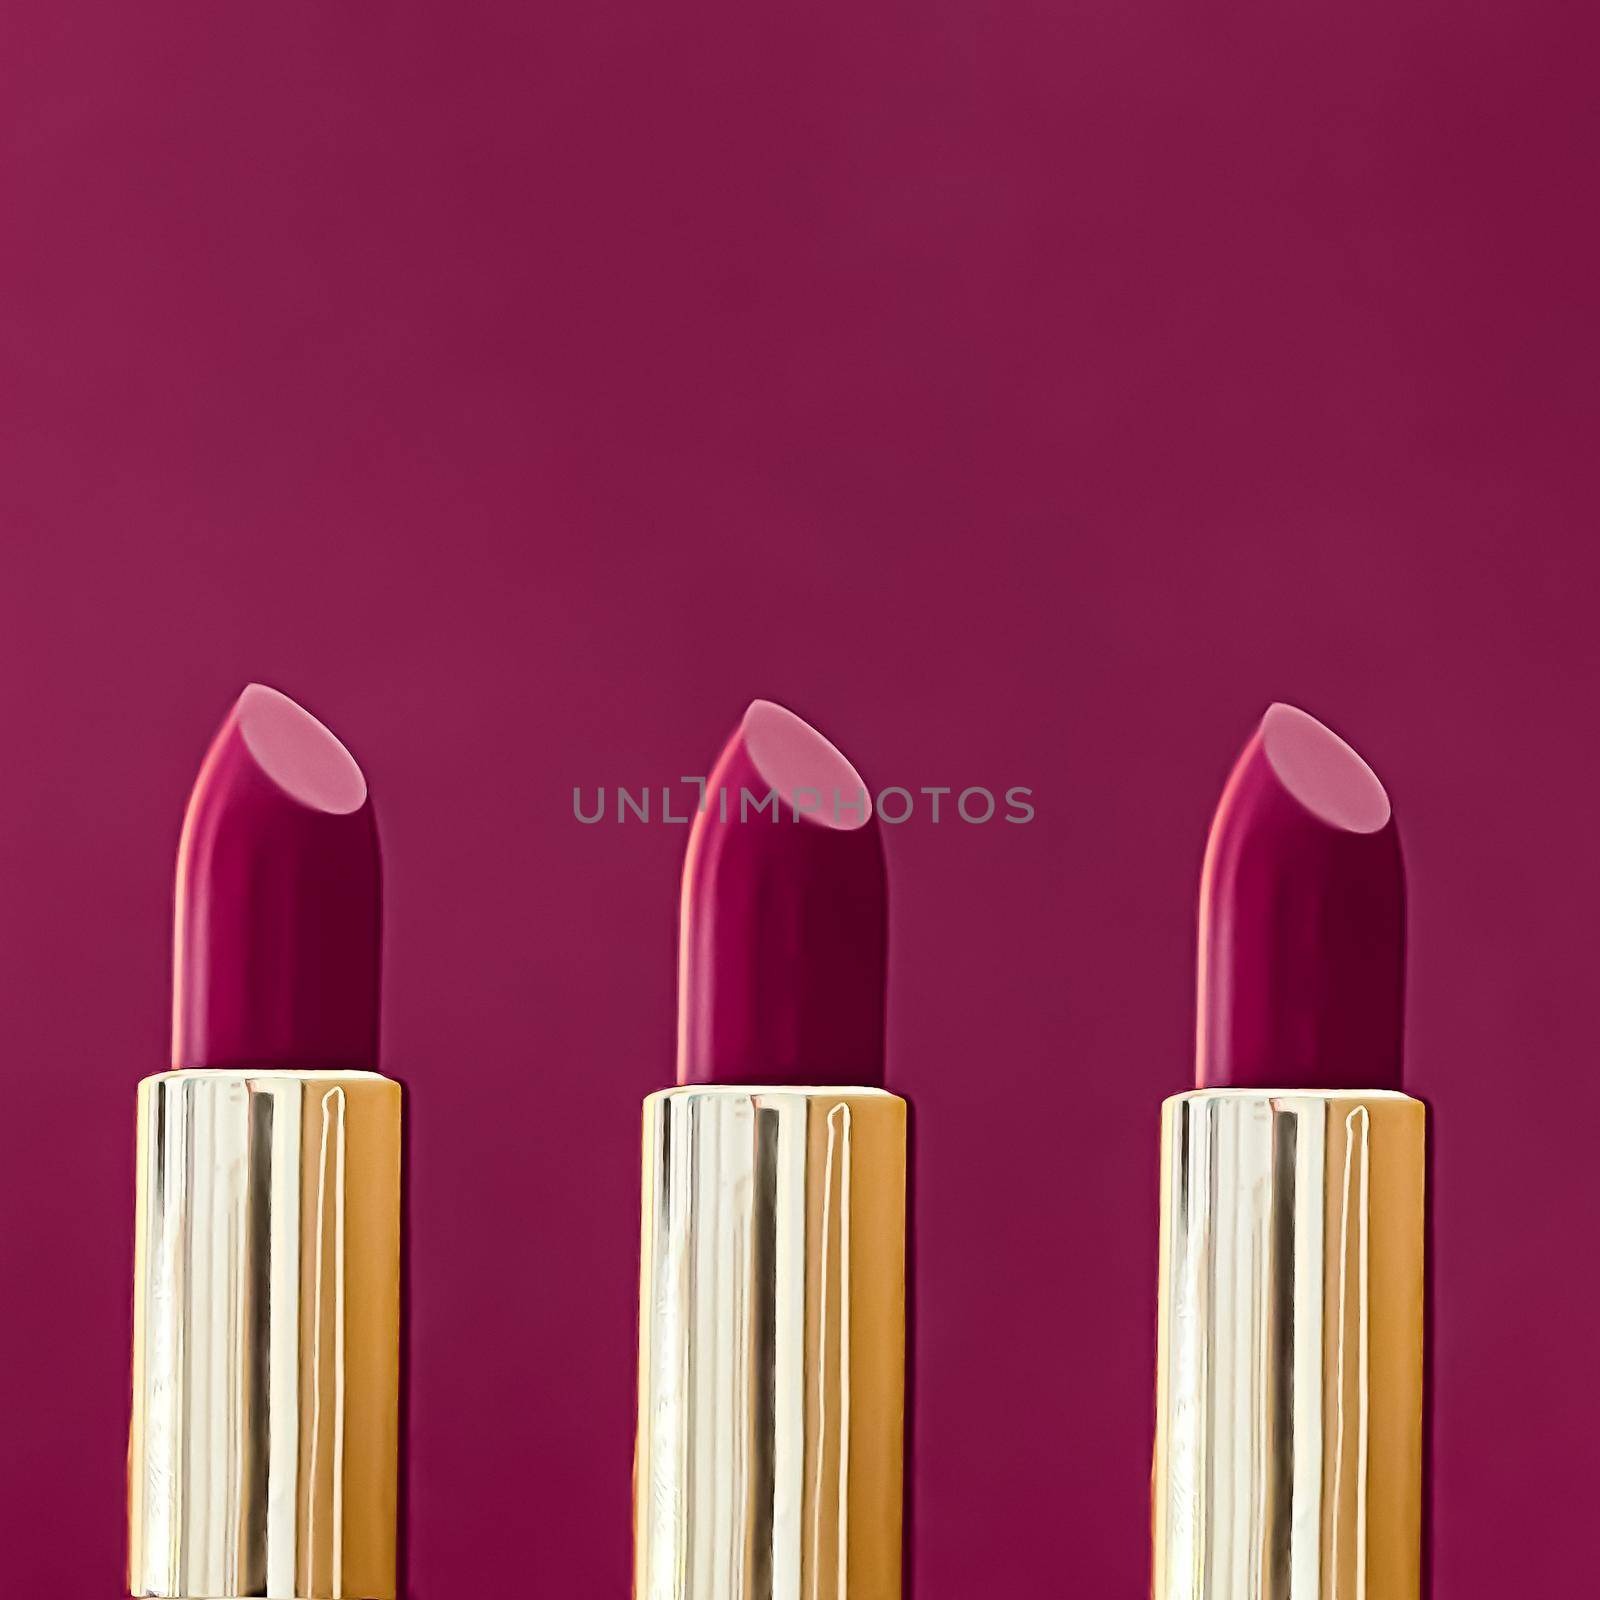 Purple lipsticks in golden tubes on colour background, luxury make-up and cosmetics for beauty brand product design concept